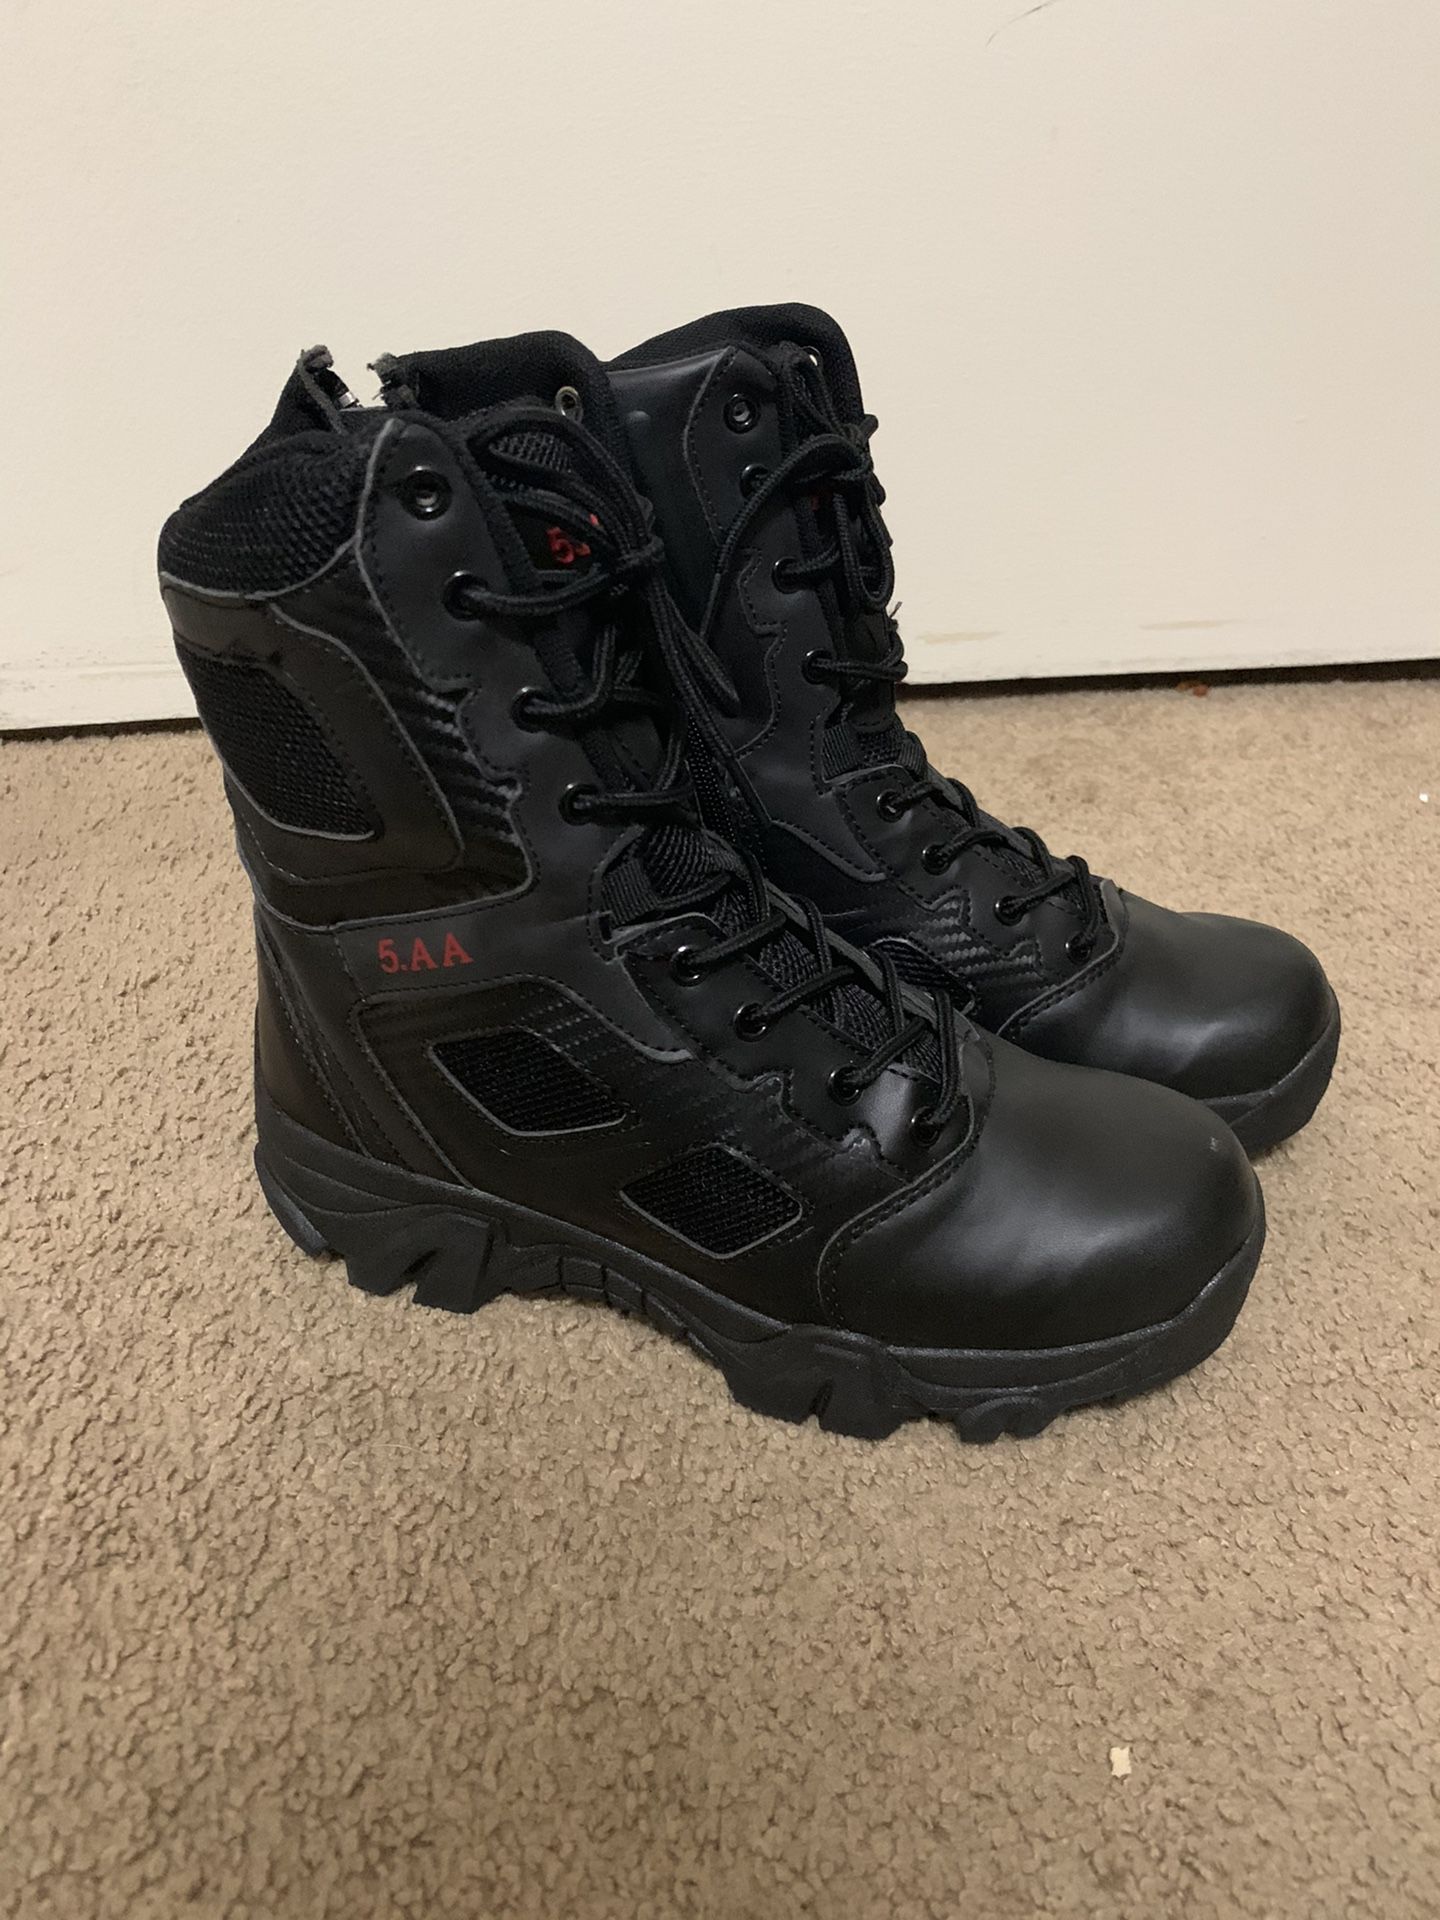 WOMENS WORK BOOTS SIZE 8